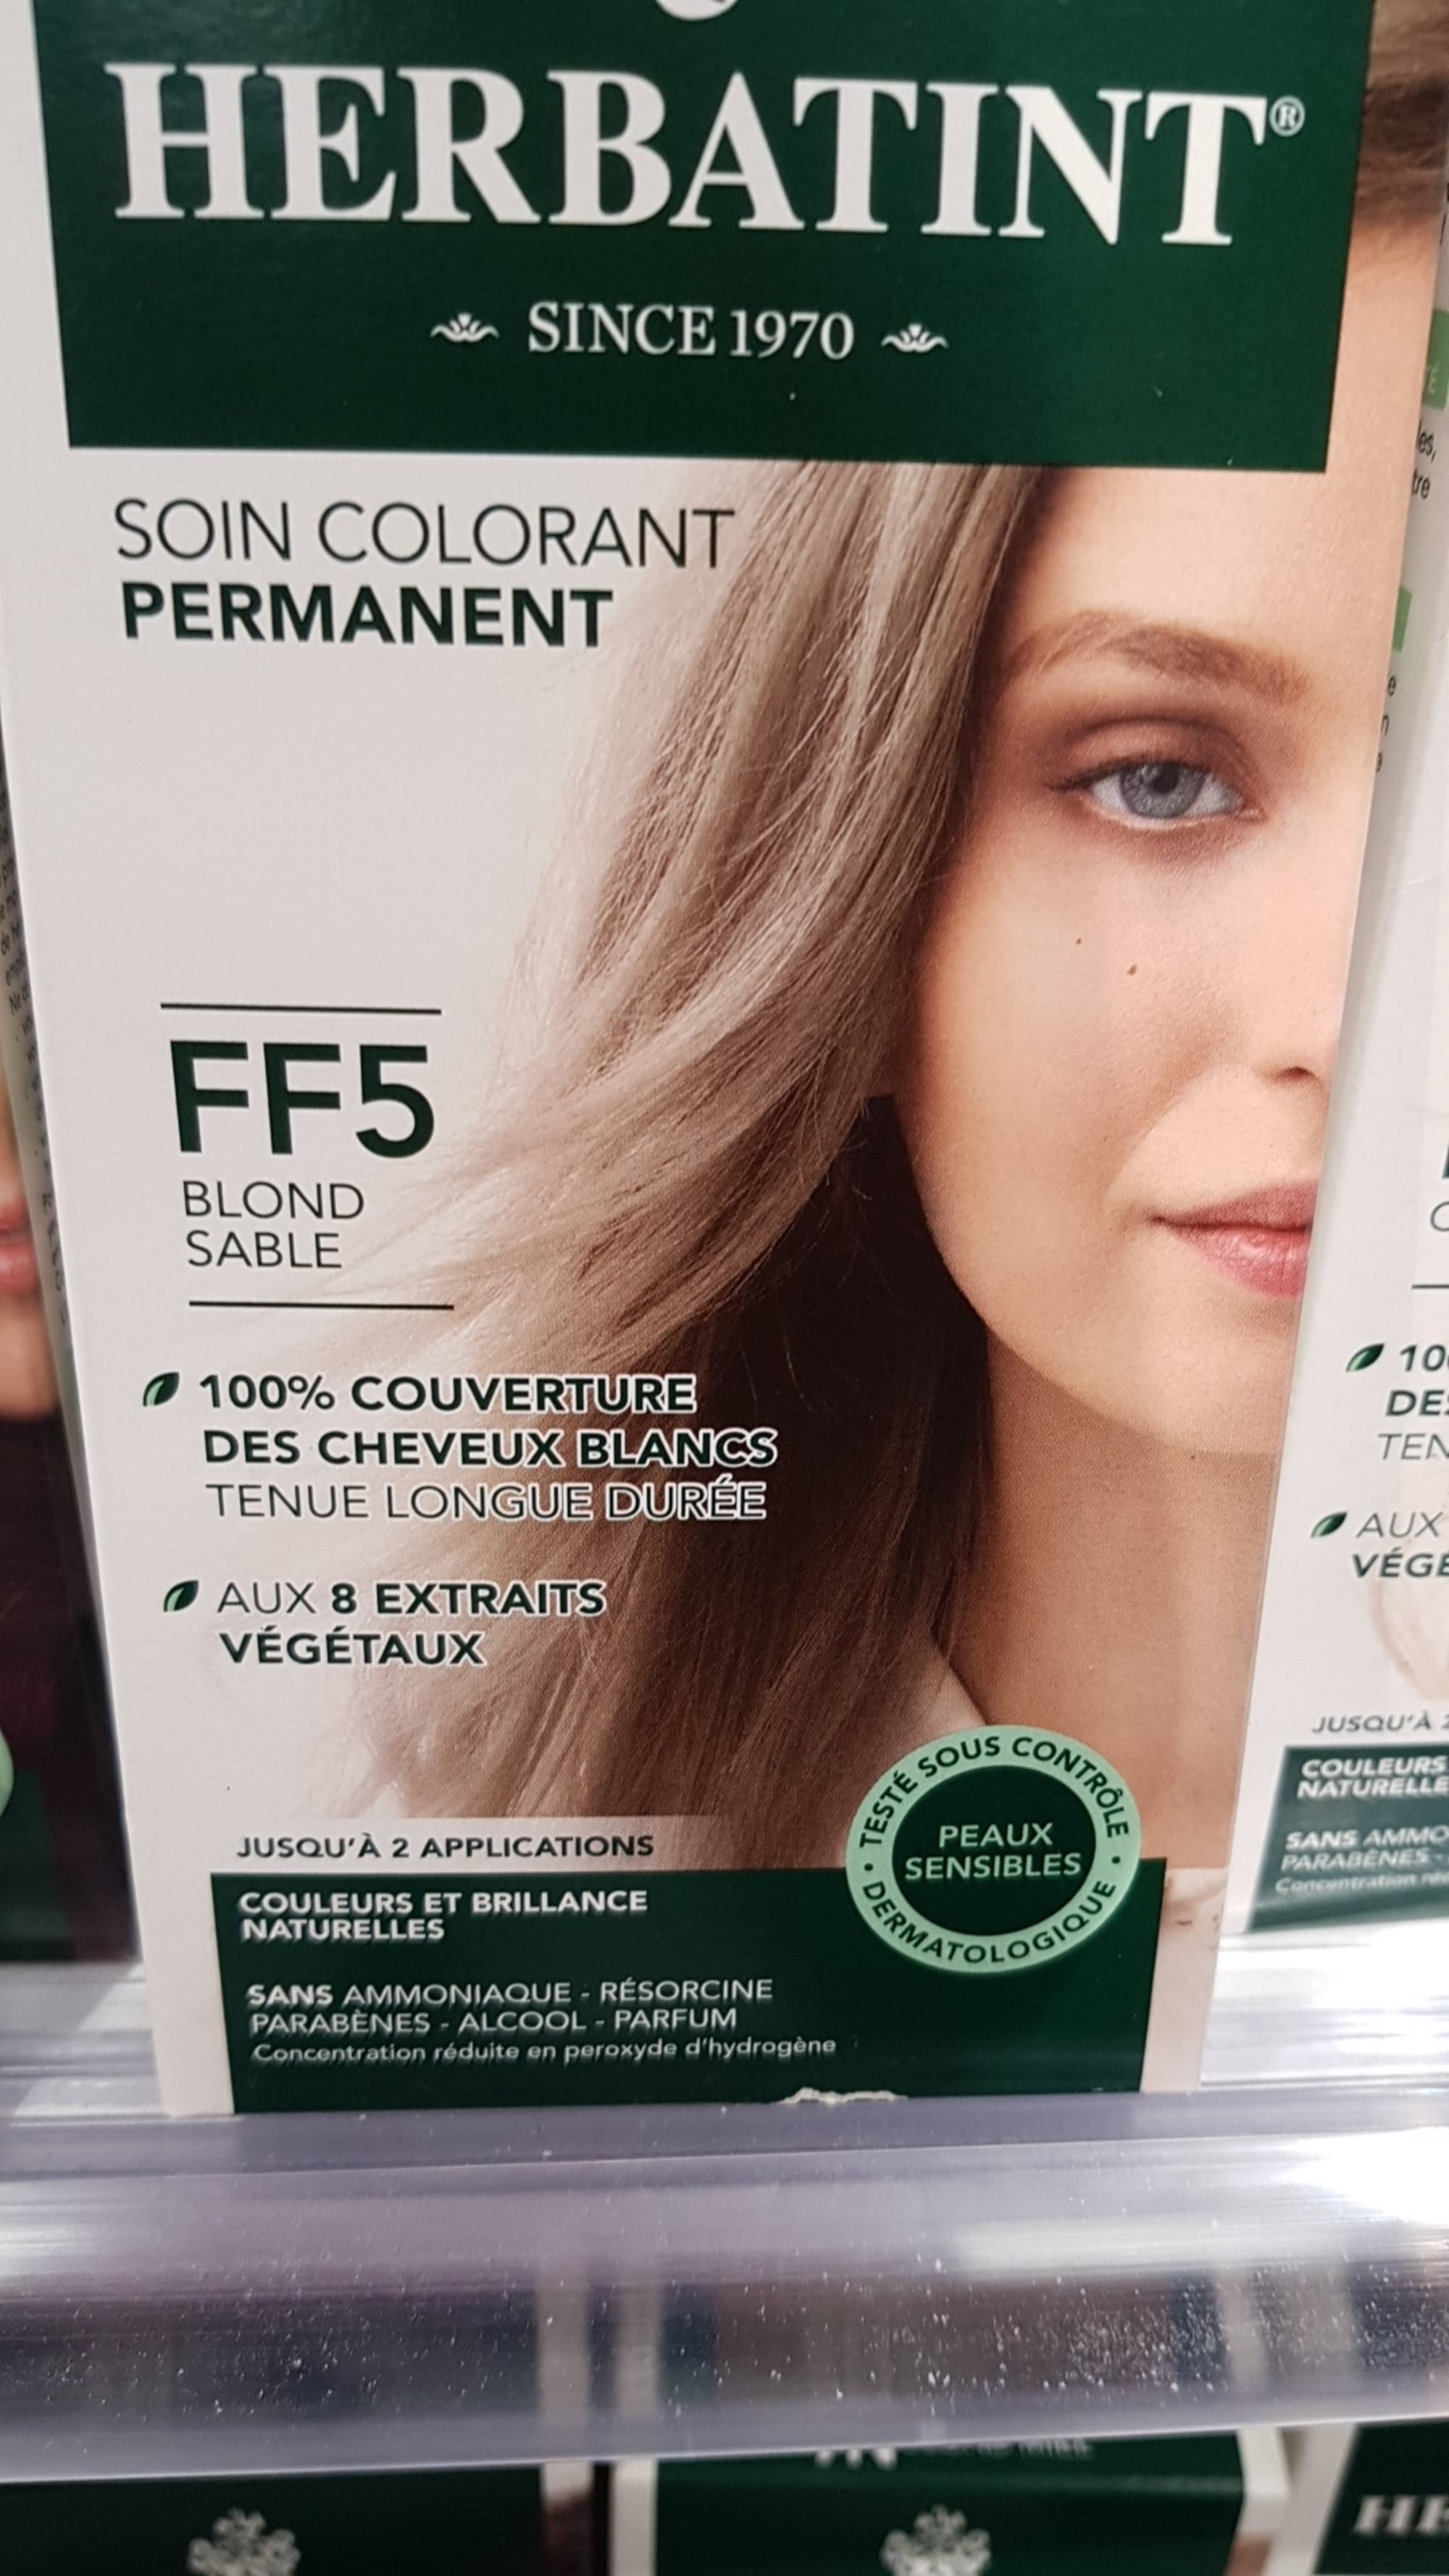 HERBATINT - Soin colorant permanent FF5 blond sable 